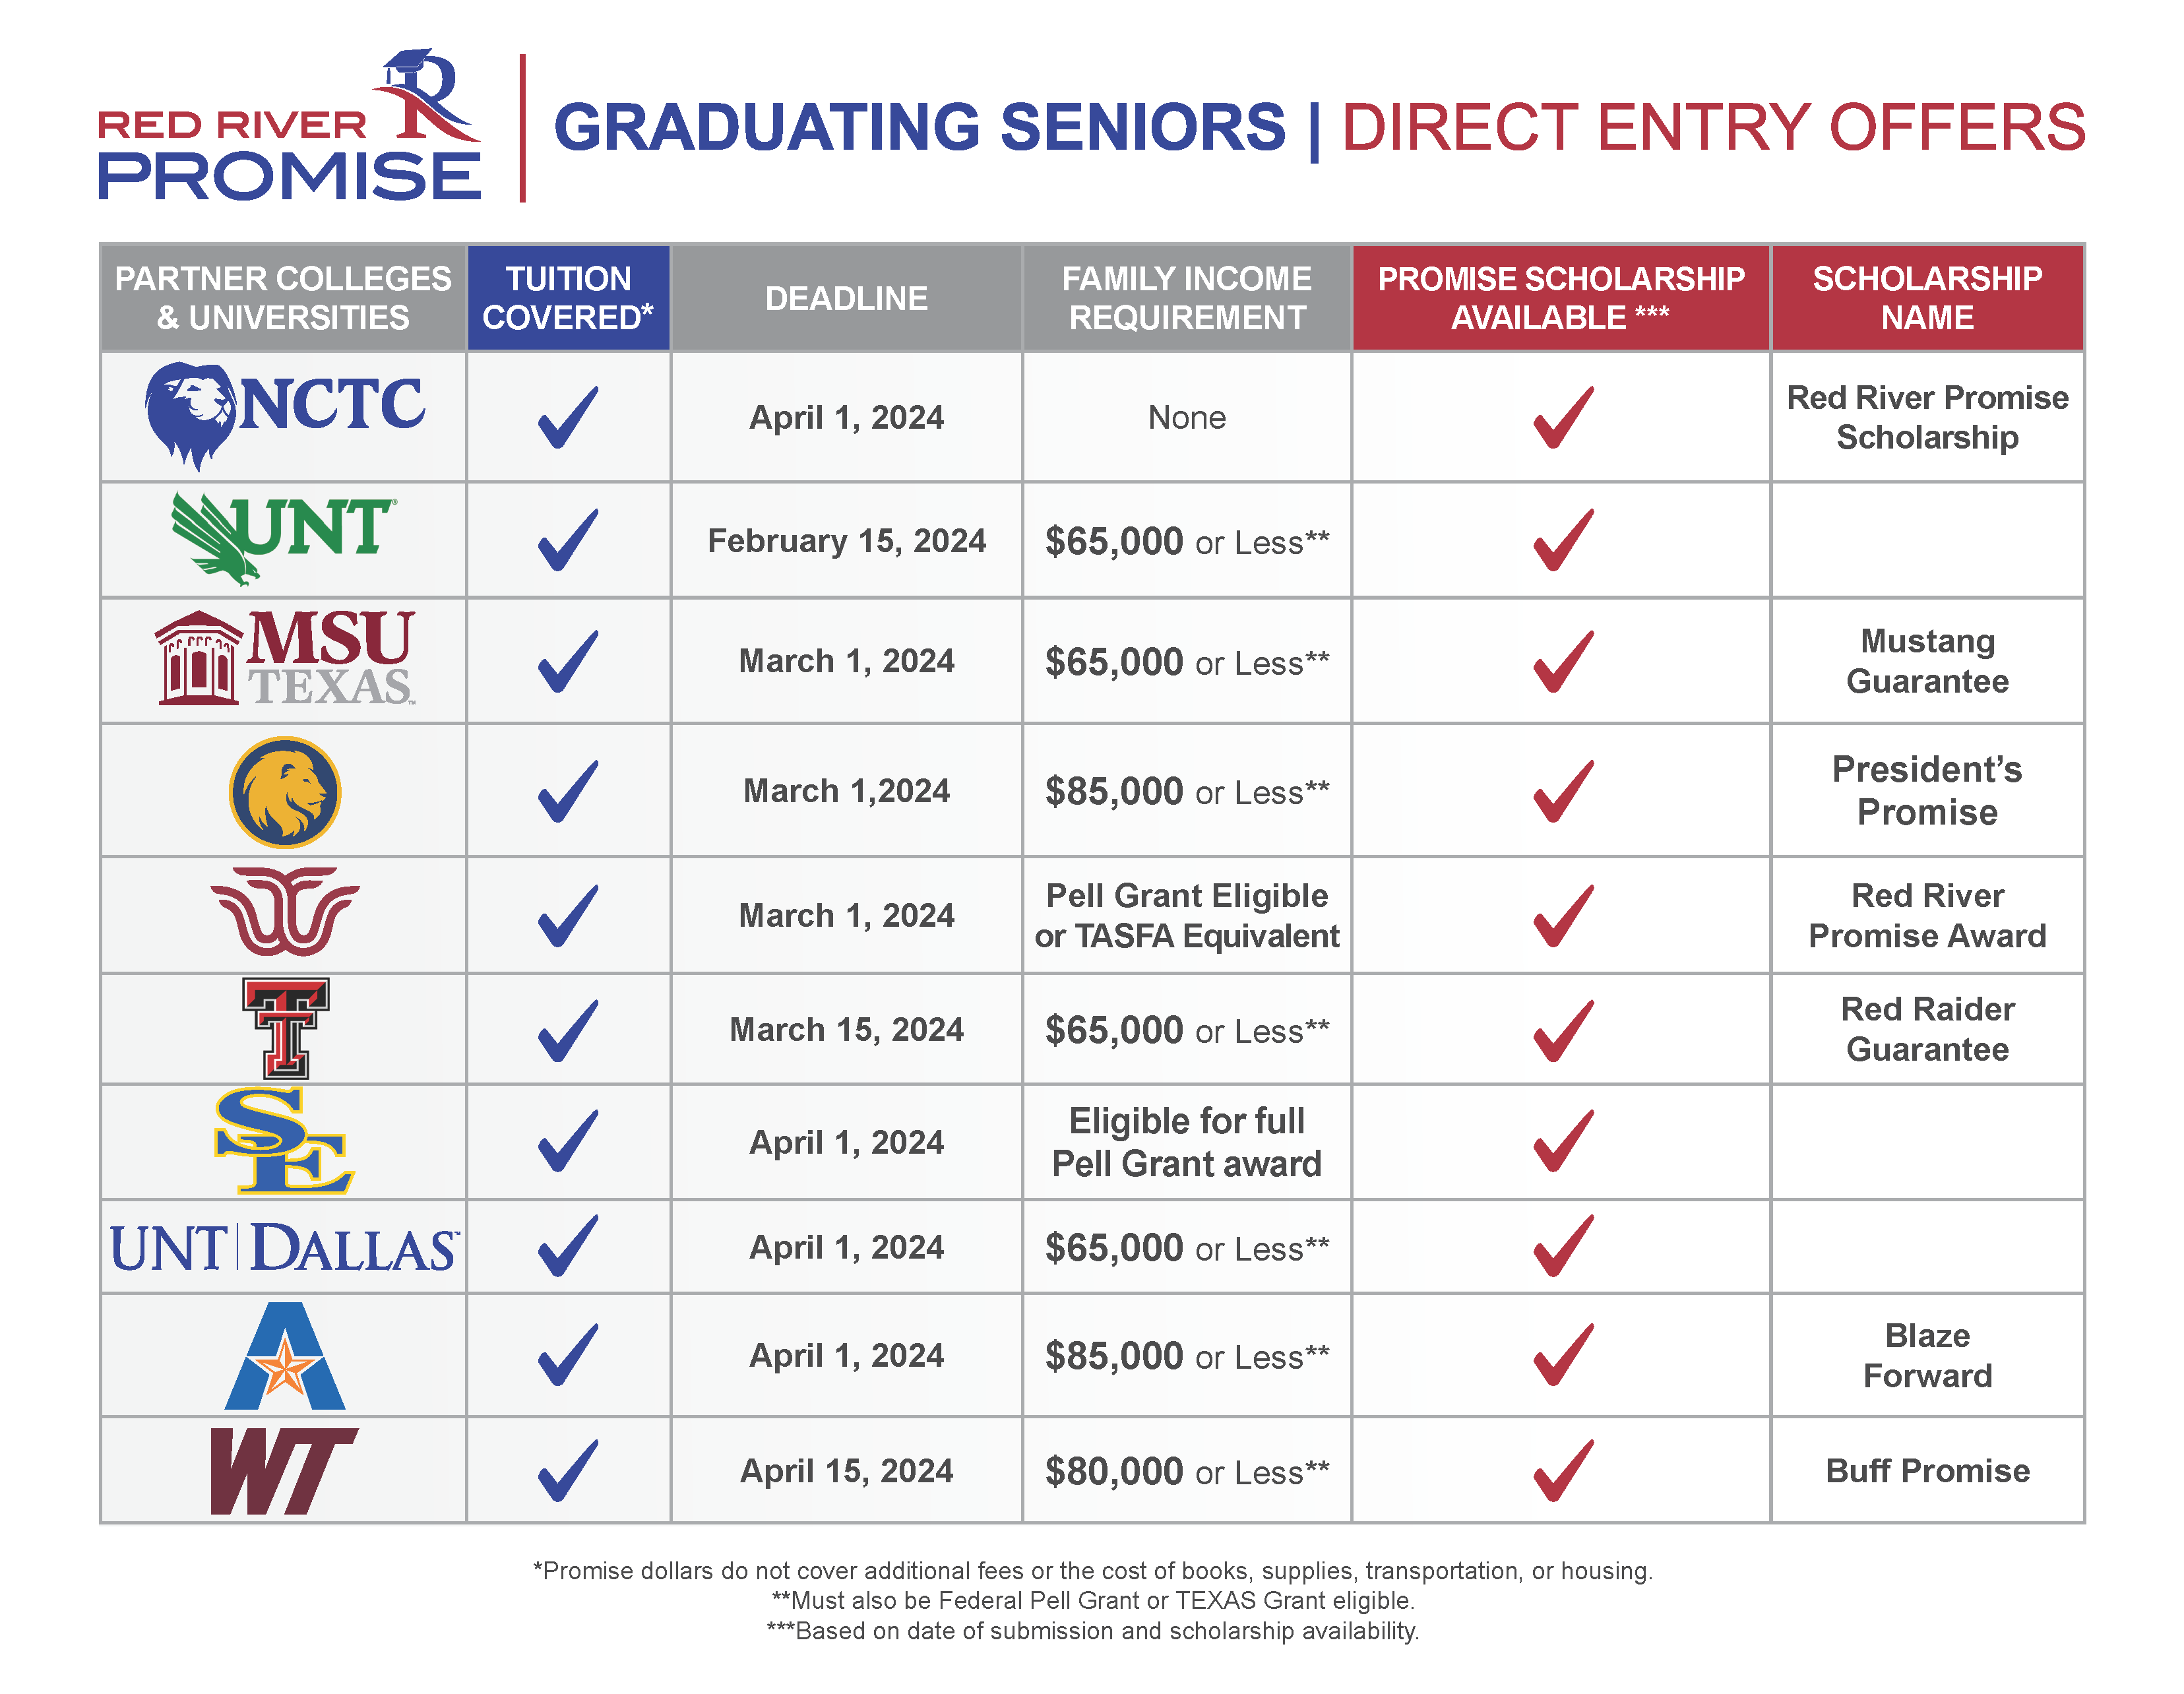 RRP entry offers for graduating seniors